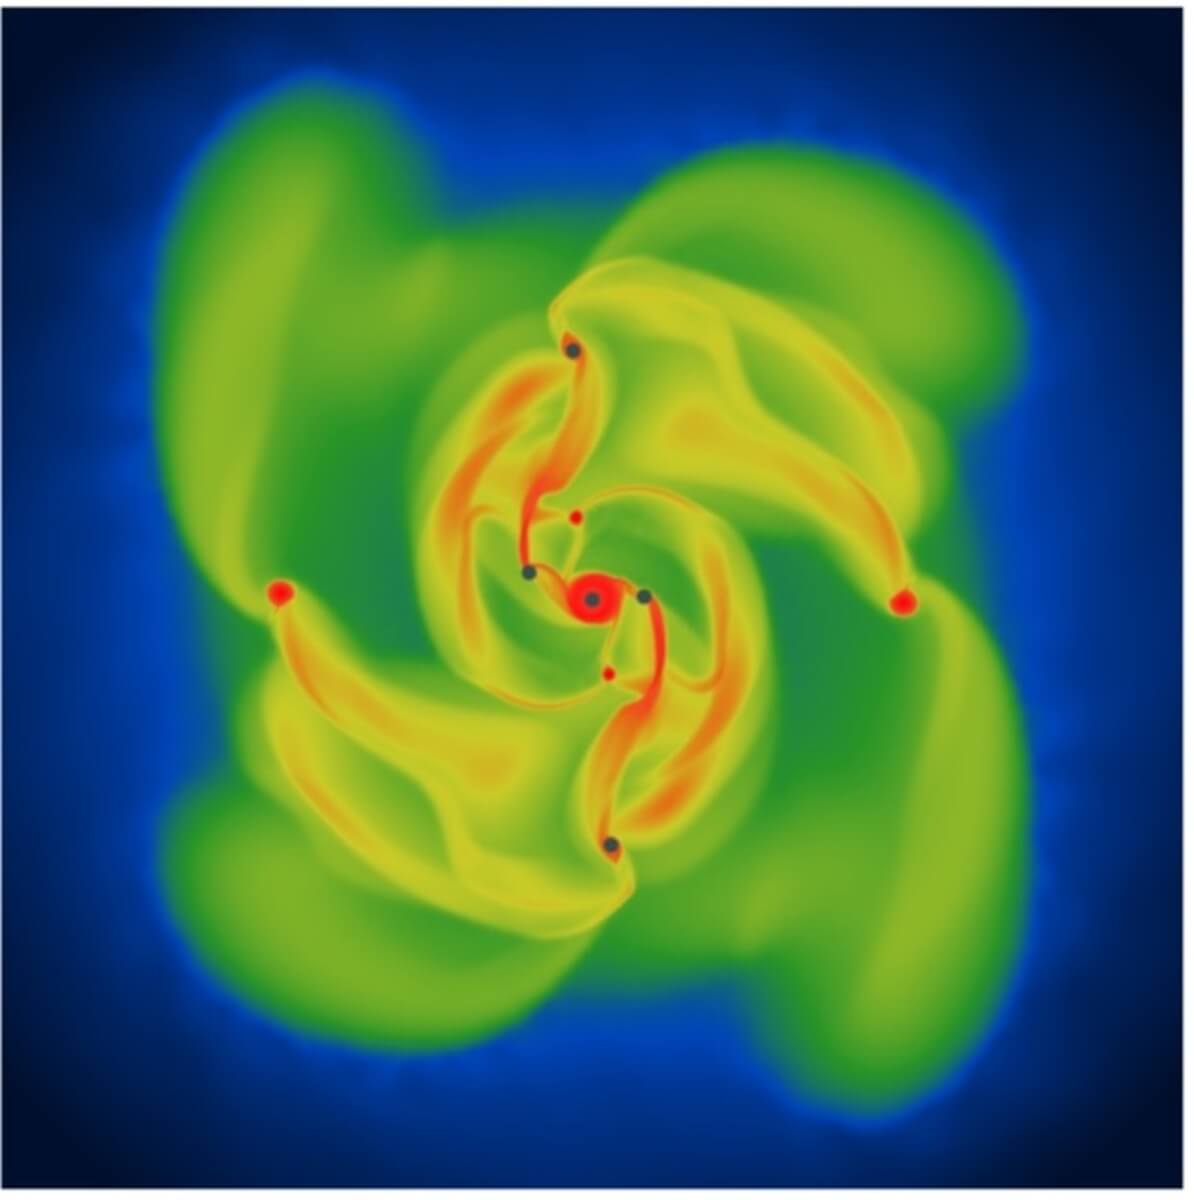 Computer simulation of planets forming in a protostellar disc